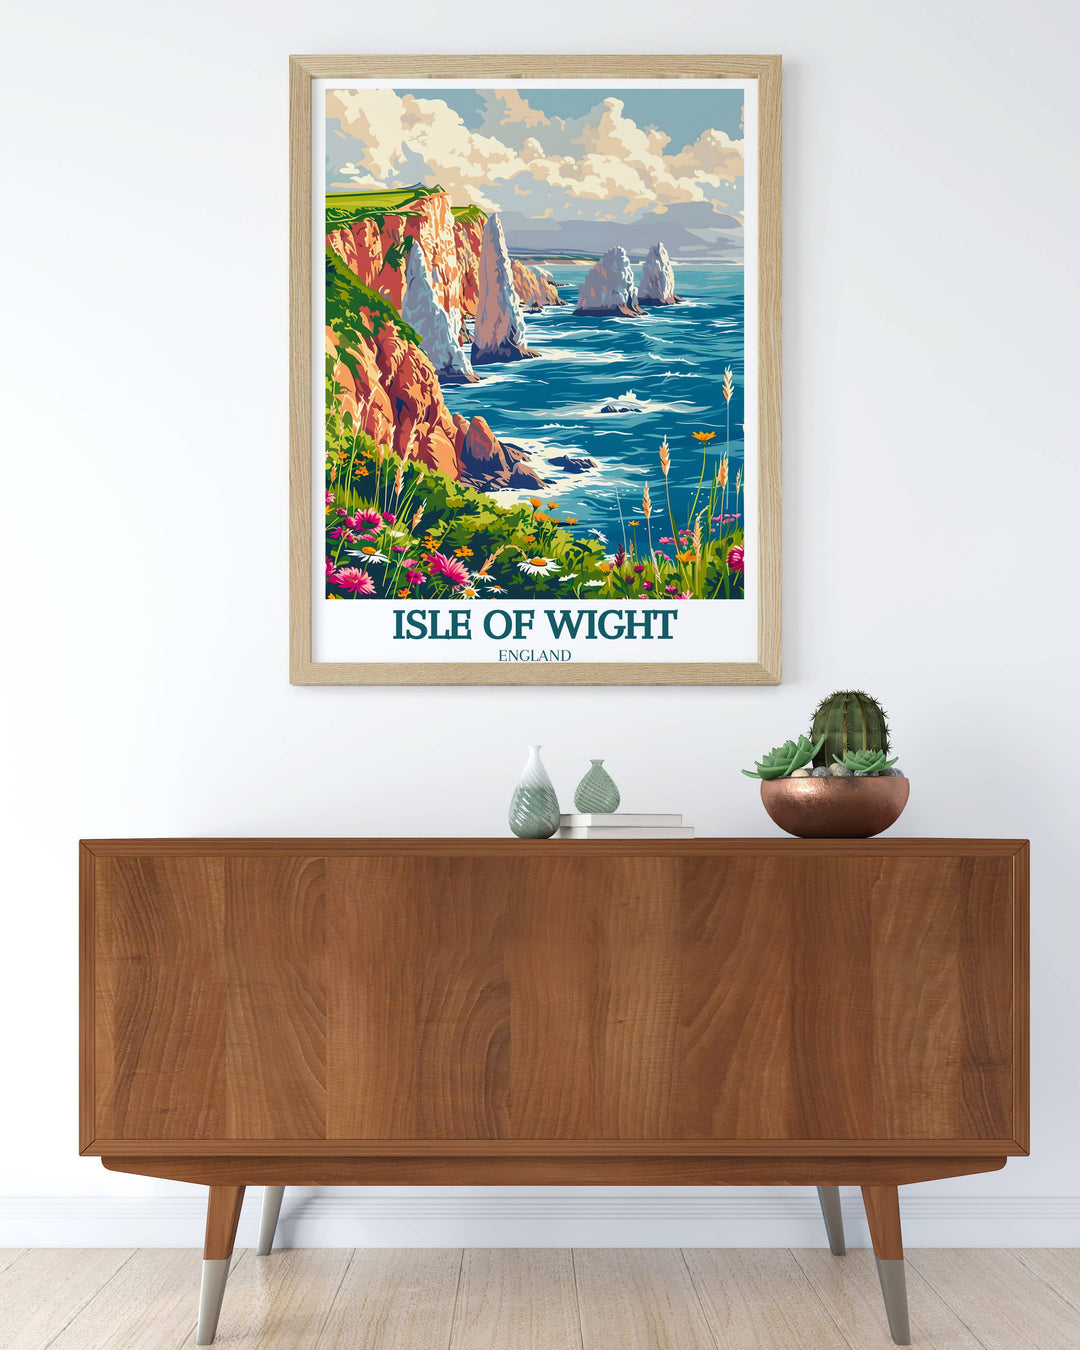 Historical portrayal of The Needles Lighthouse in a vintage style, reminiscent of early 20th-century travel posters, perfect for adding a nostalgic touch to a study or living room.